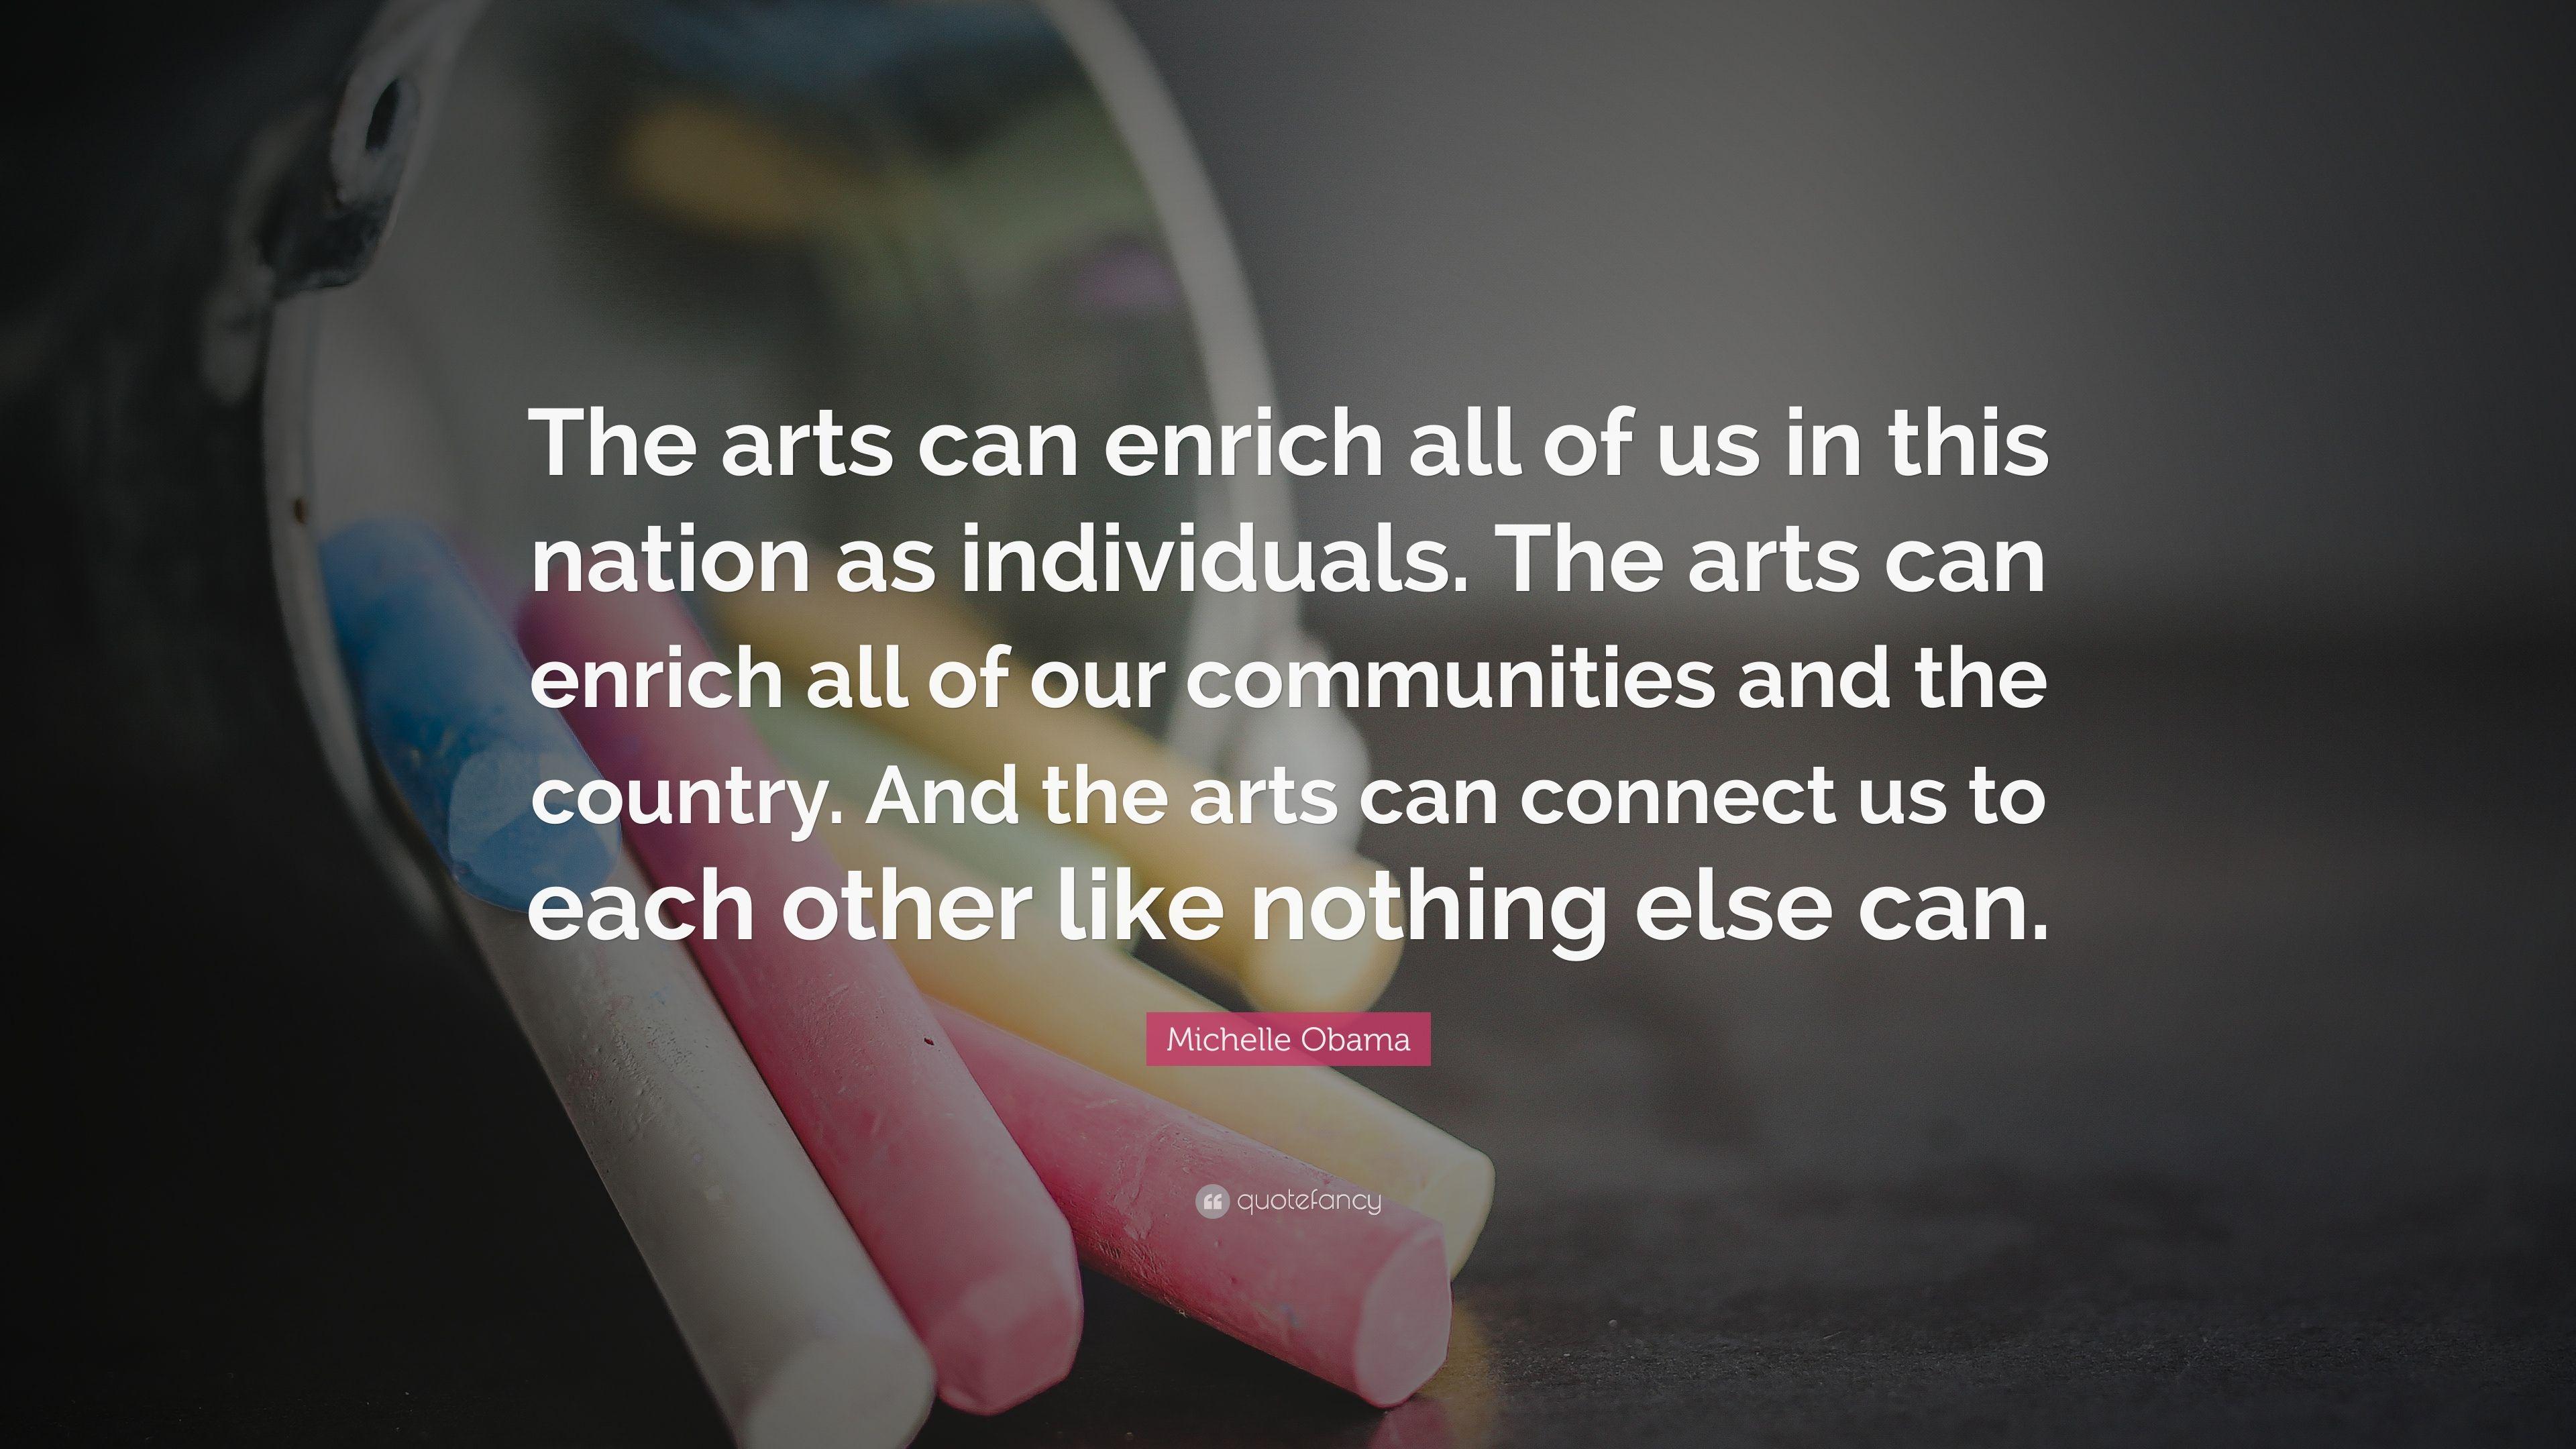 Michelle Obama Quote: “The arts can enrich all of us in this